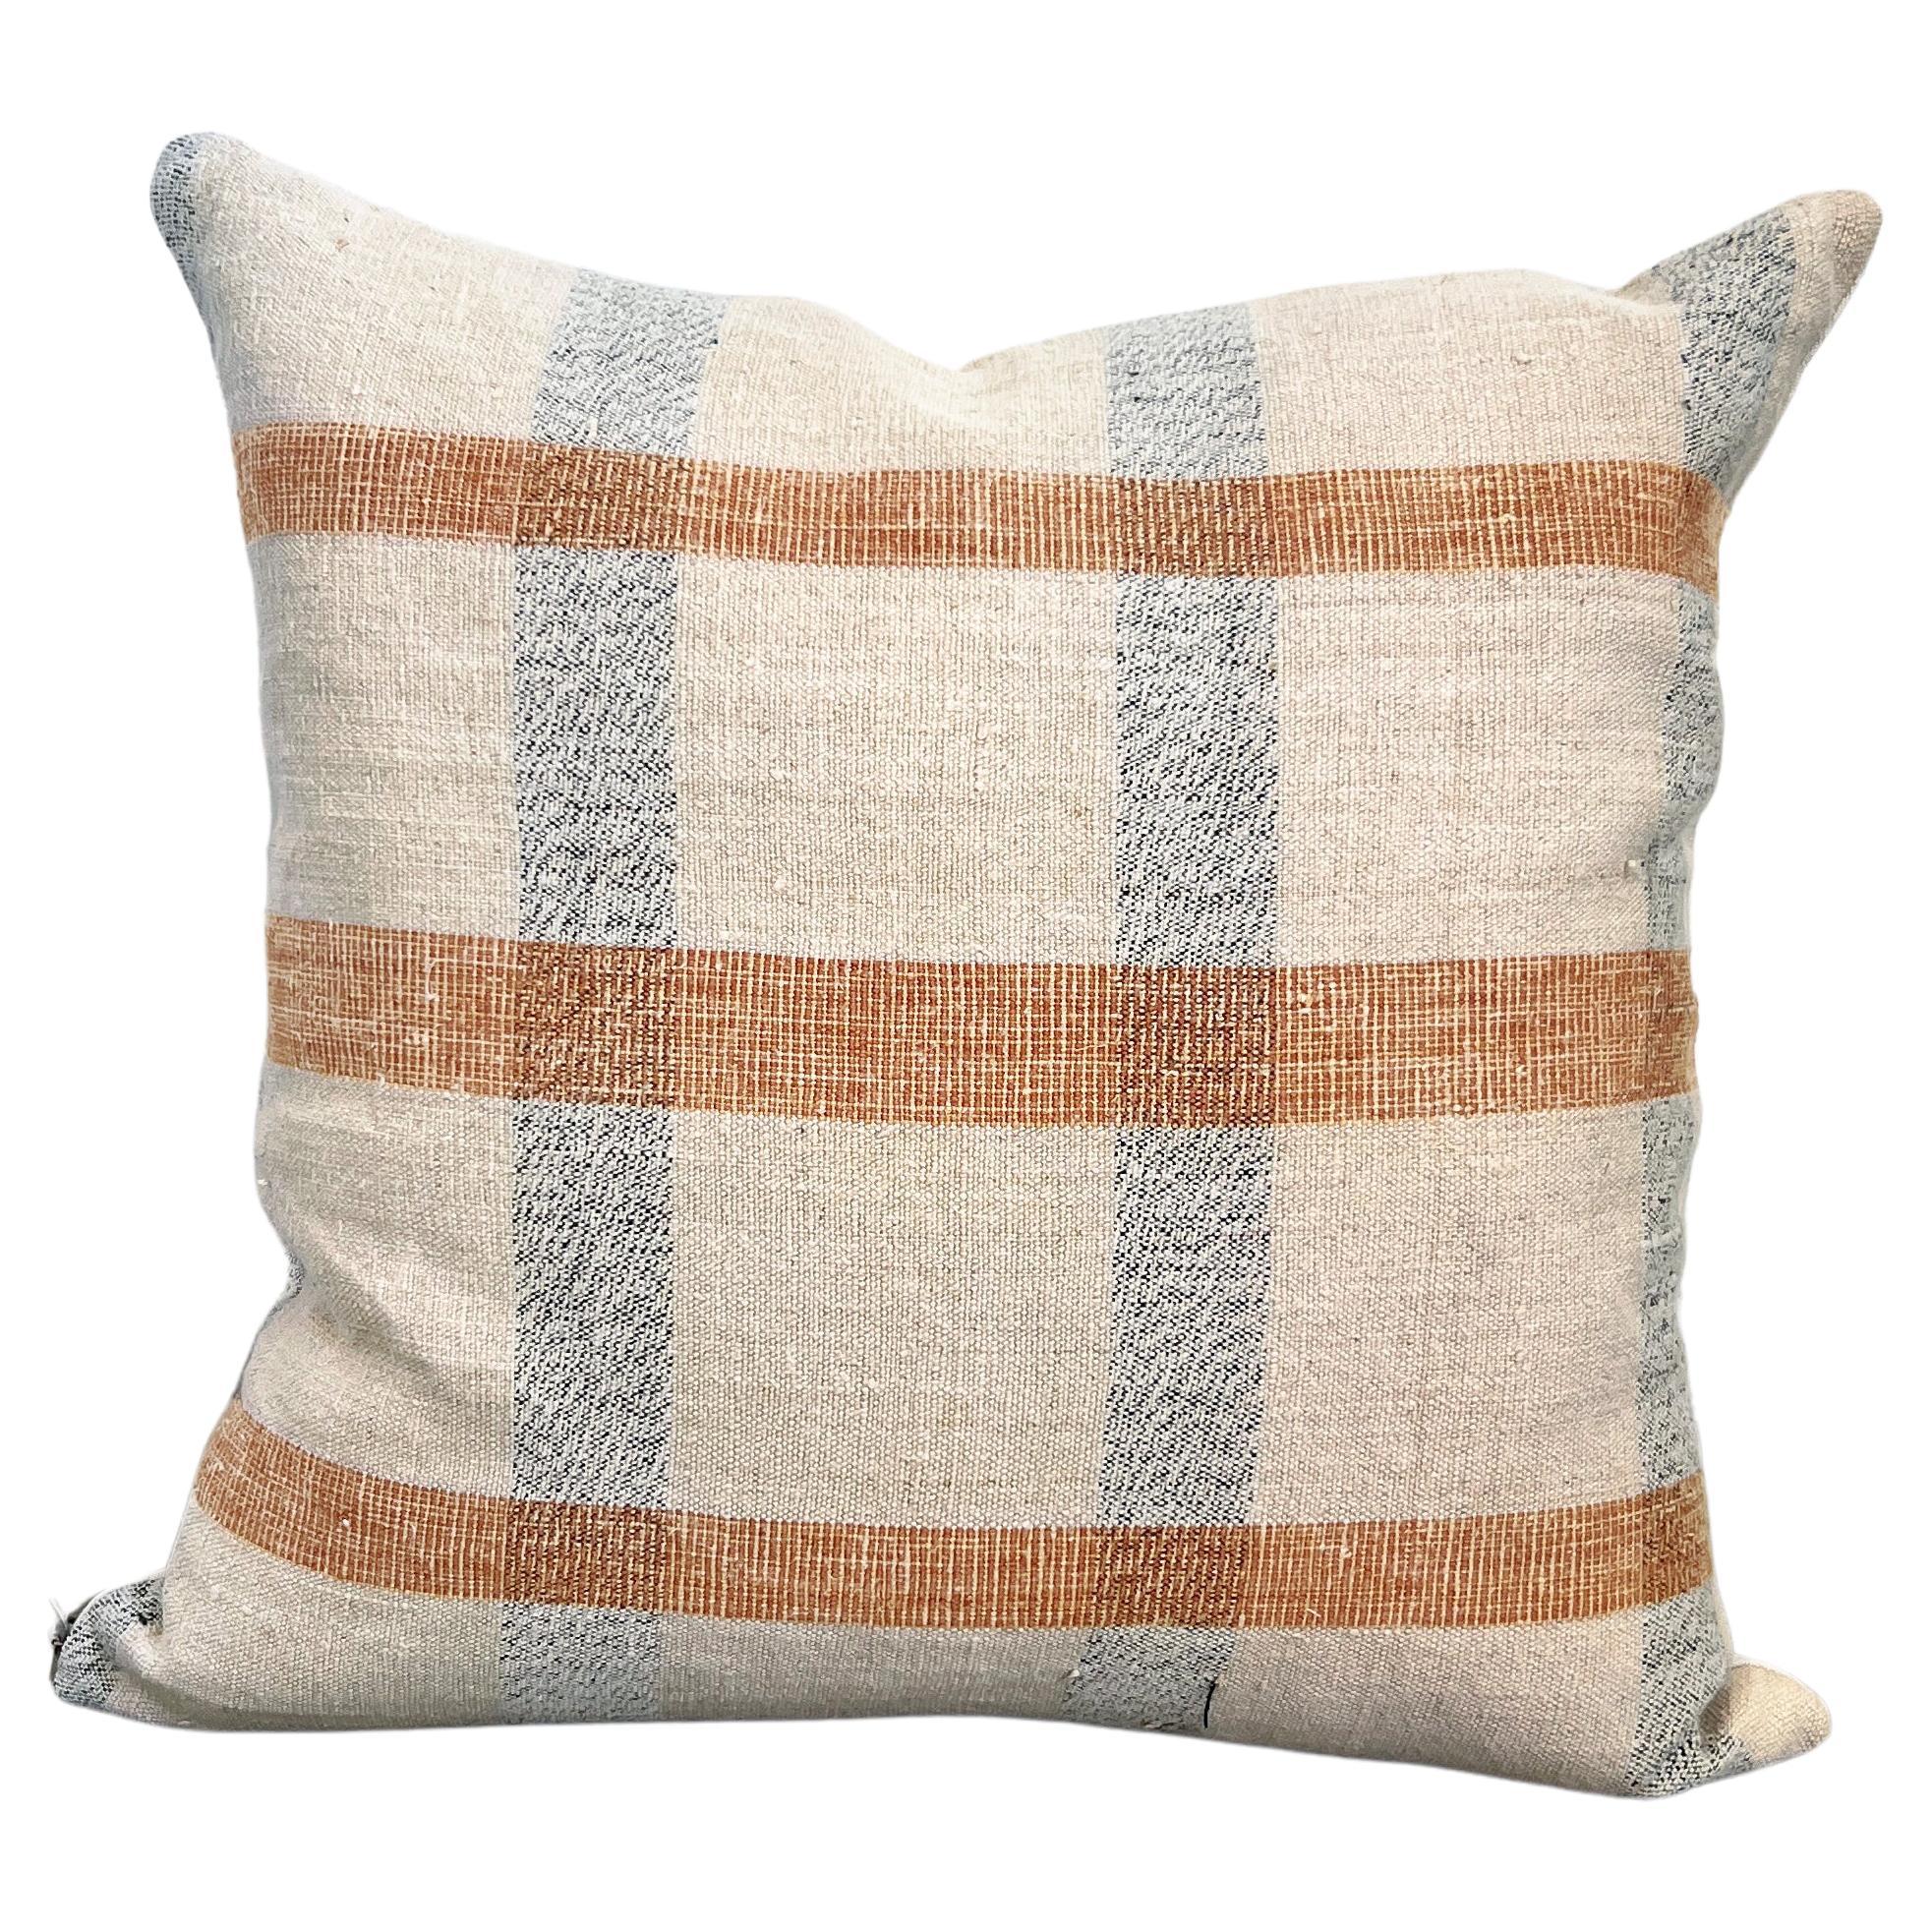 Matilde Terracotta Checkered Square Throw Pillow made from Vintage Linen For Sale